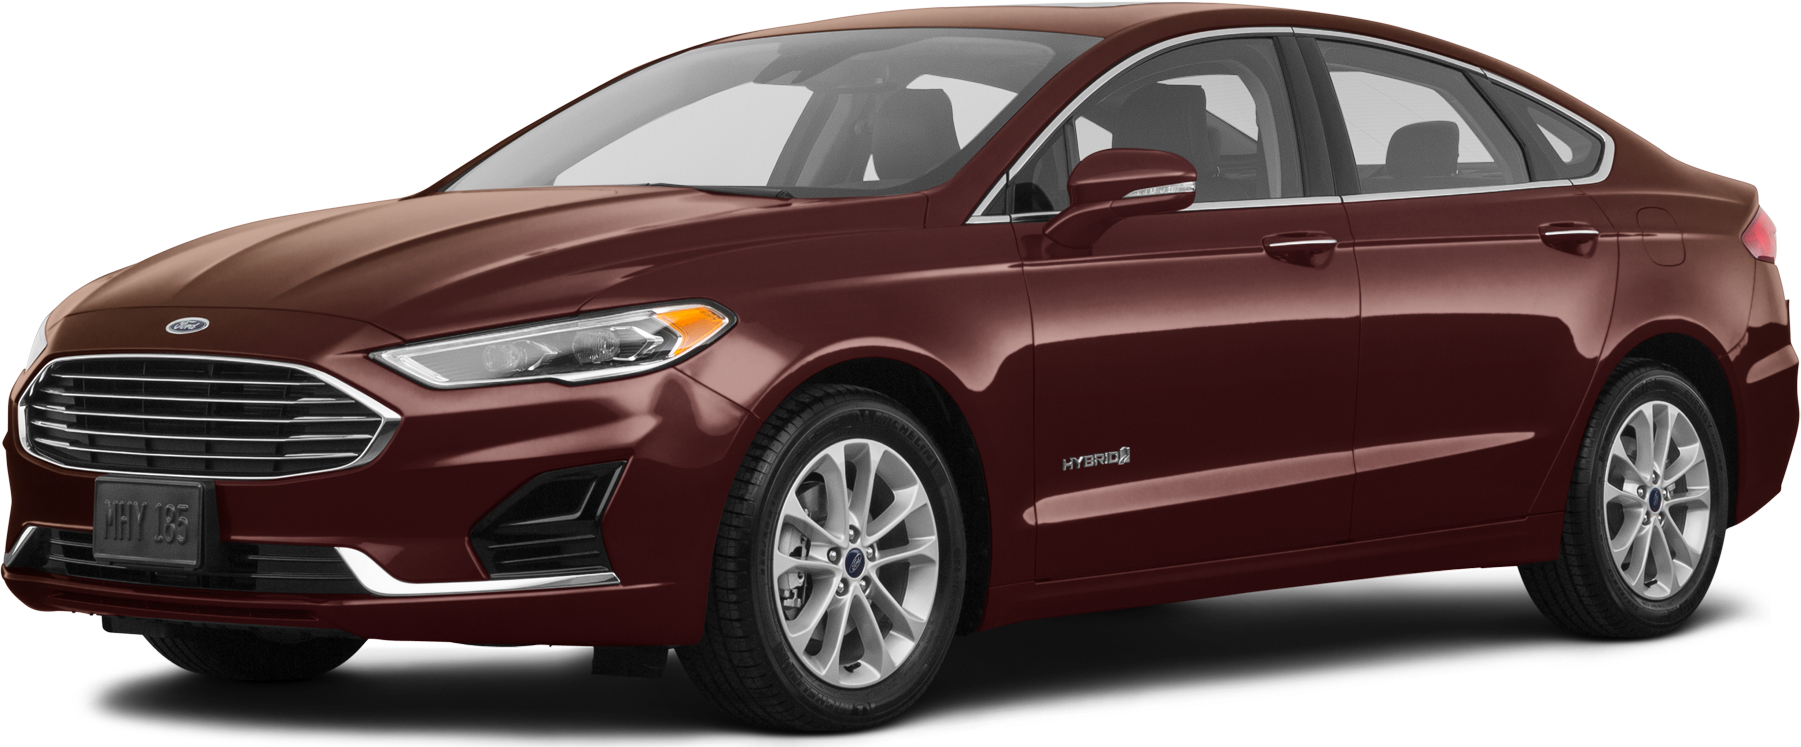 Burgundy Ford Fusion Hybrid Side View PNG